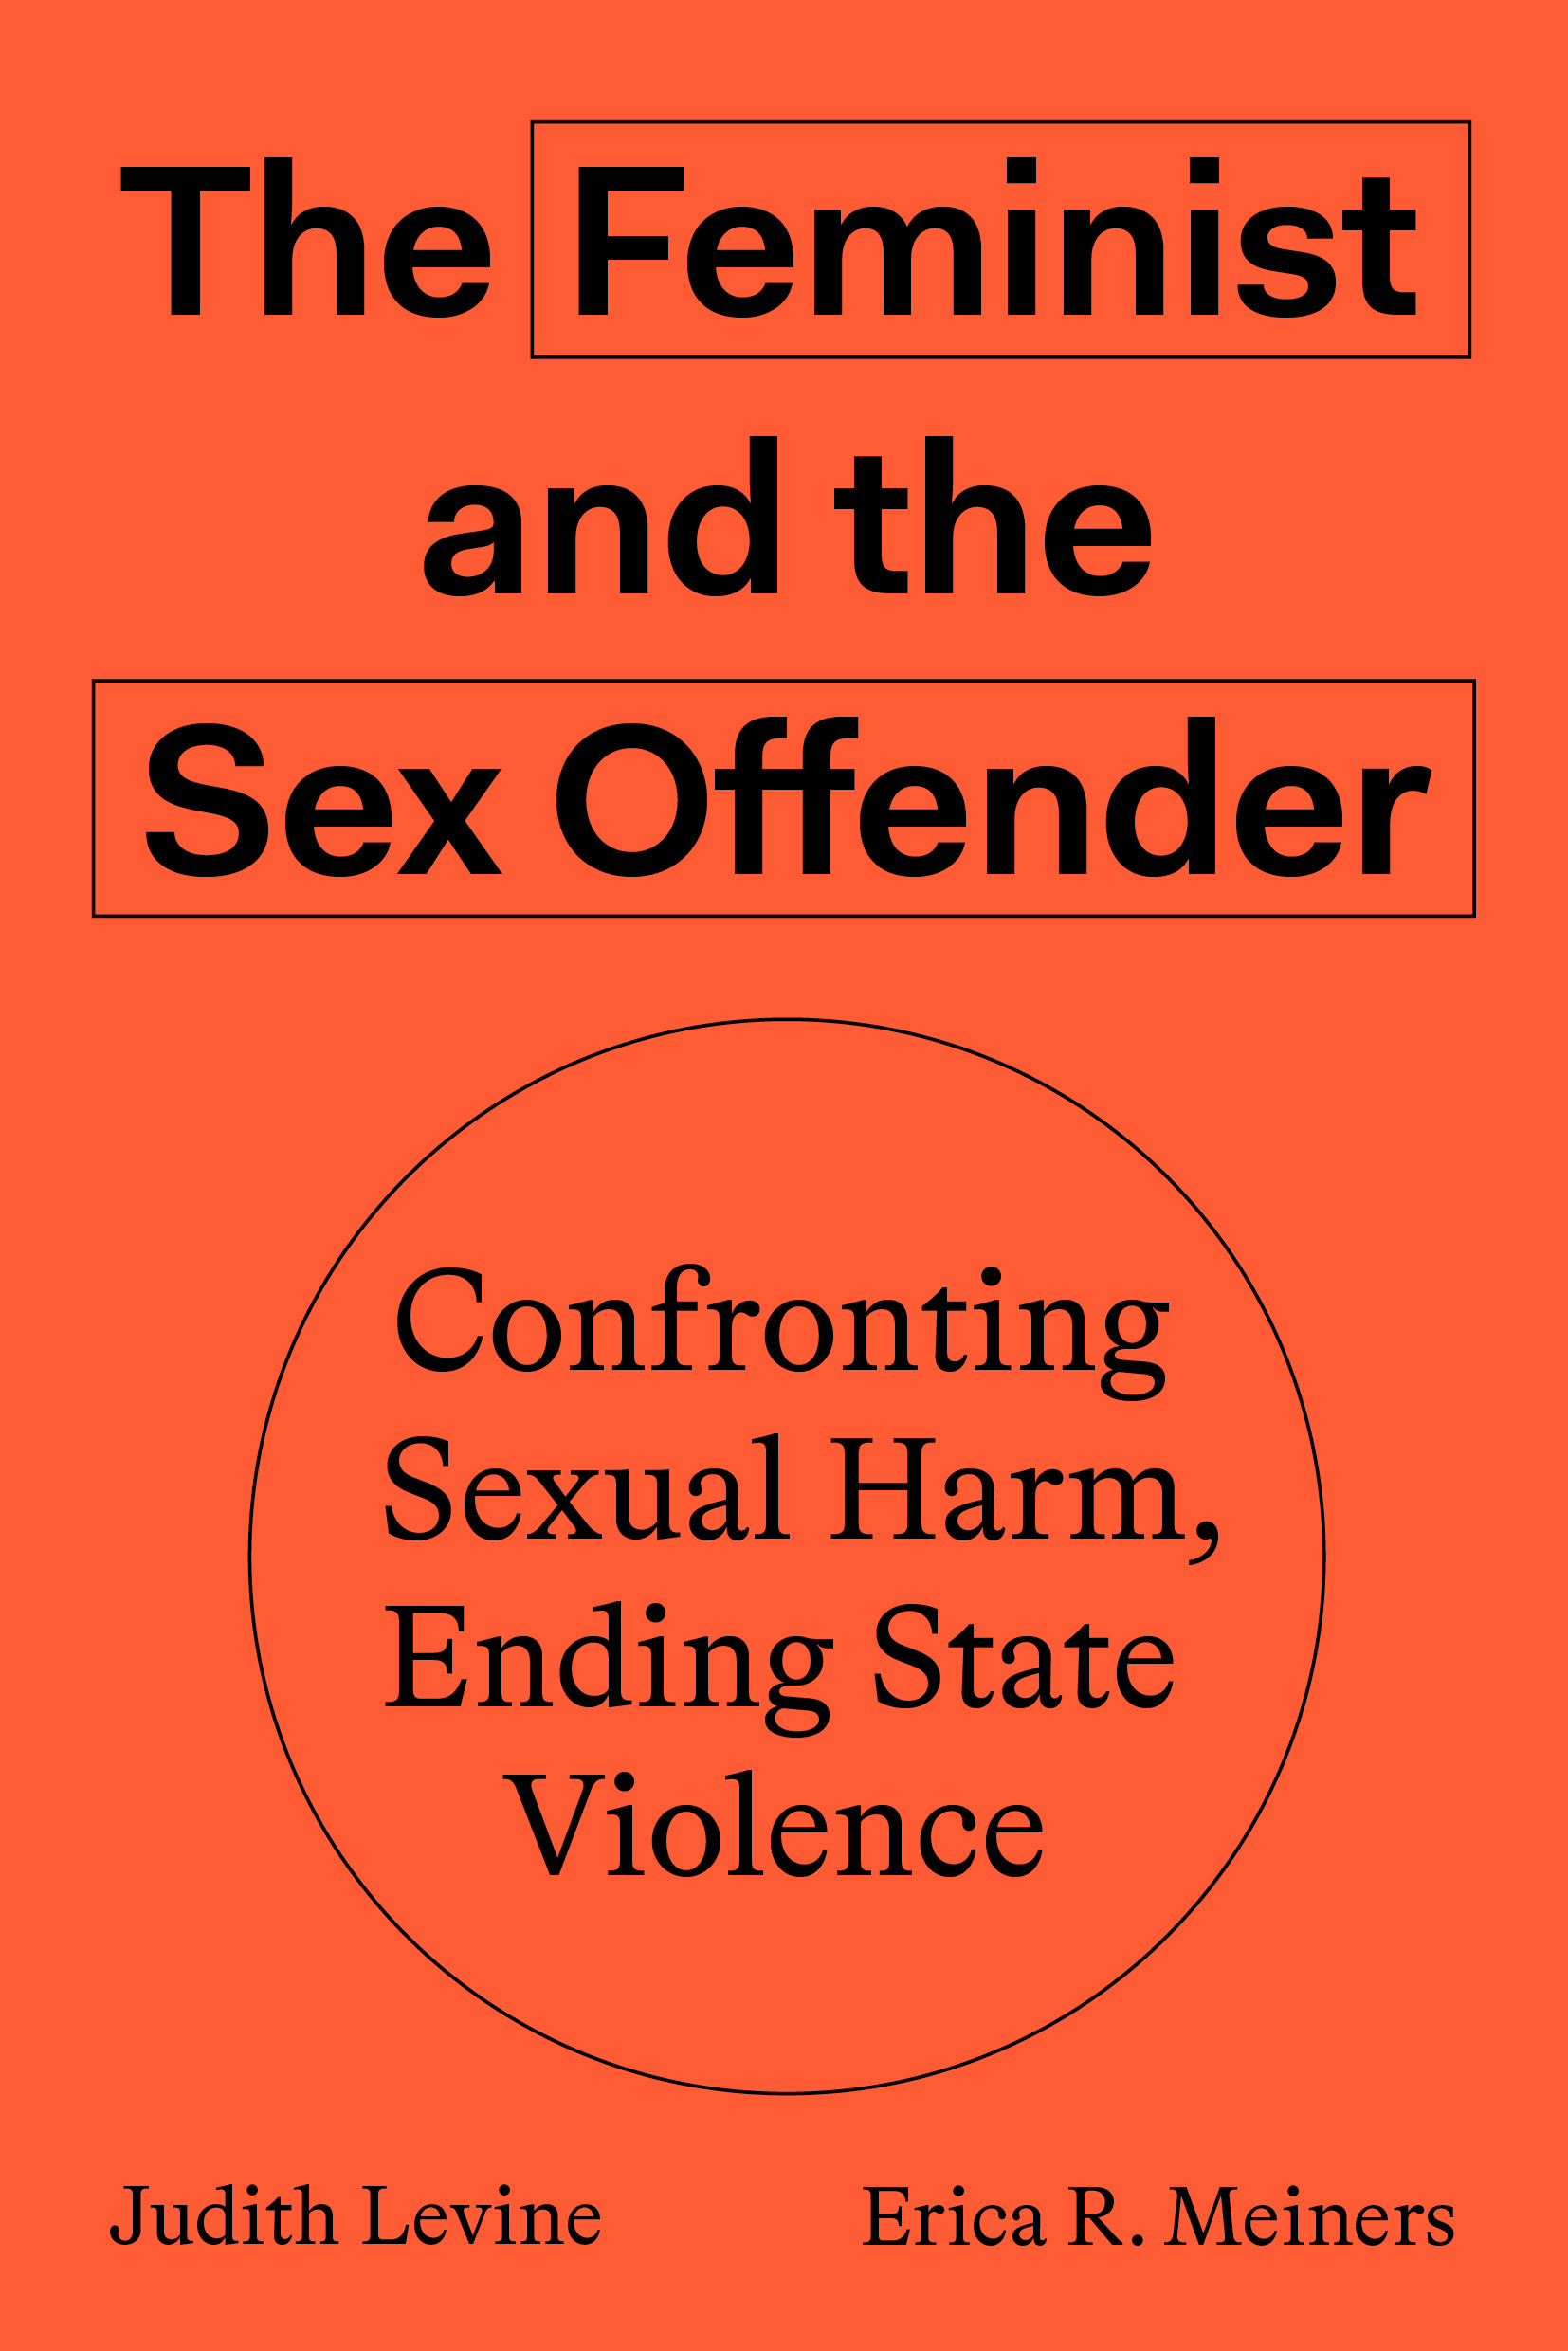 The Feminist And The Sex Offender By Judith Levine And Erica Meiners